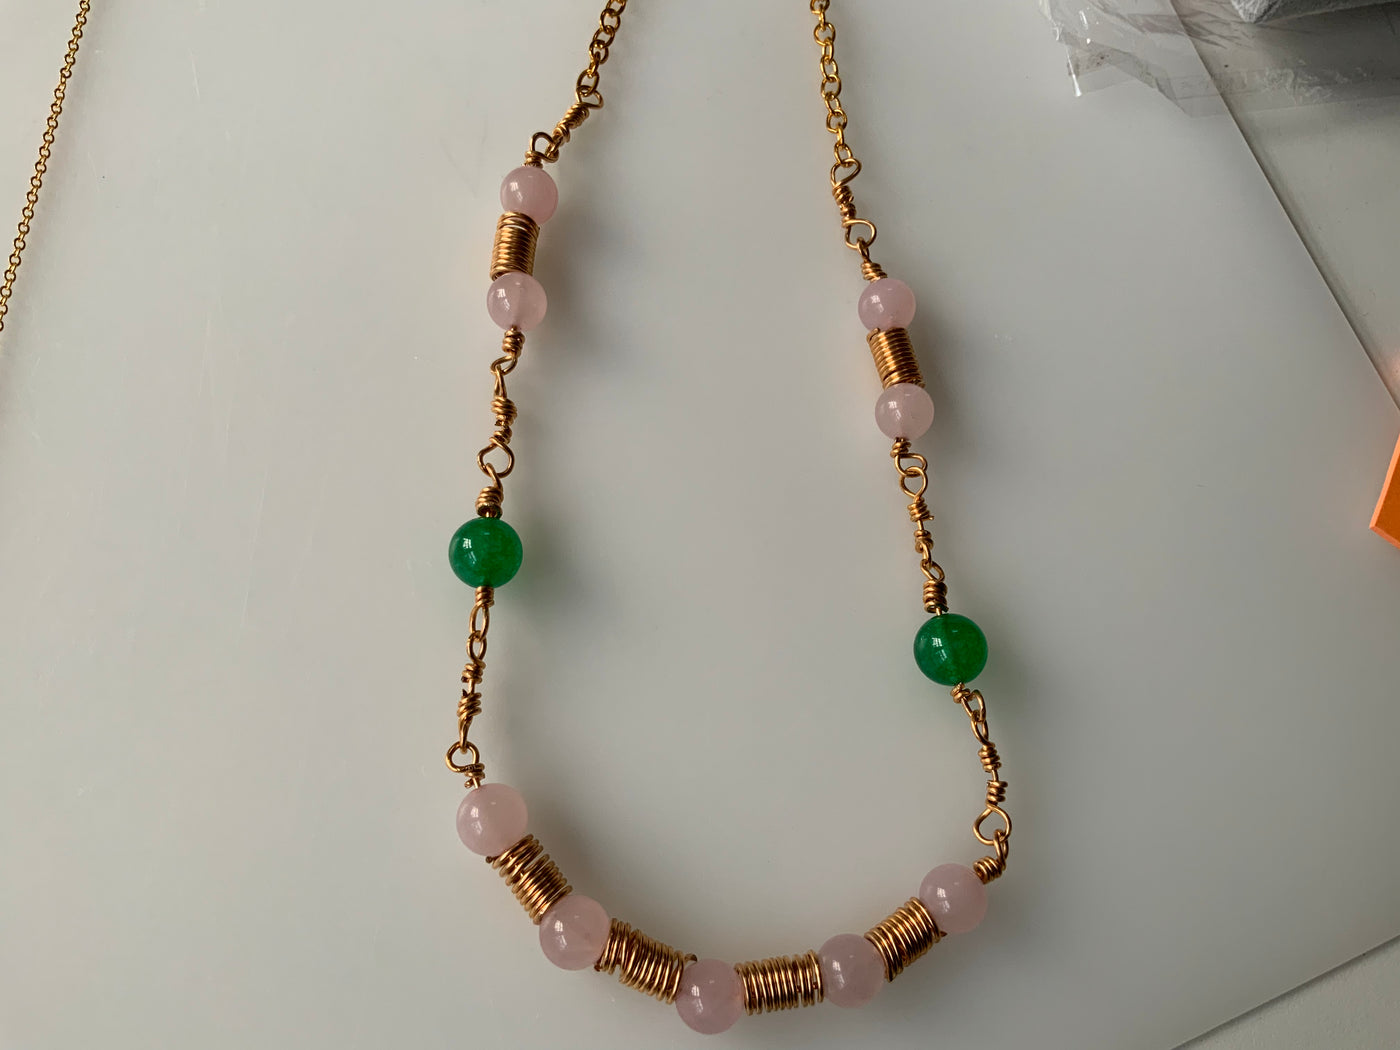 Green calchedony, rose quartz and wire chain necklace